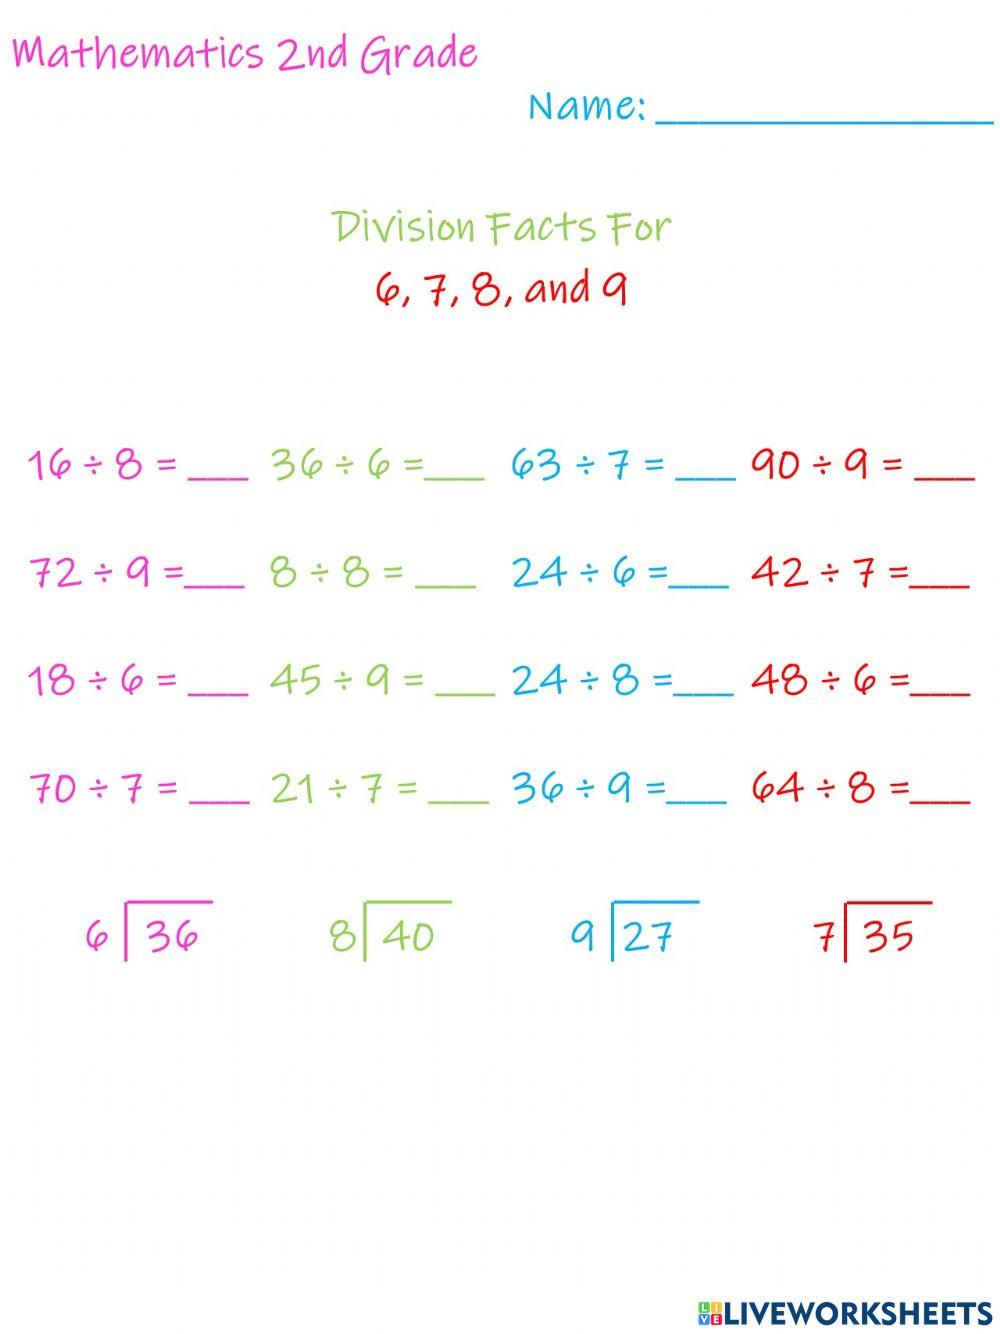 Division Facts For 6, 7, 8, and 9